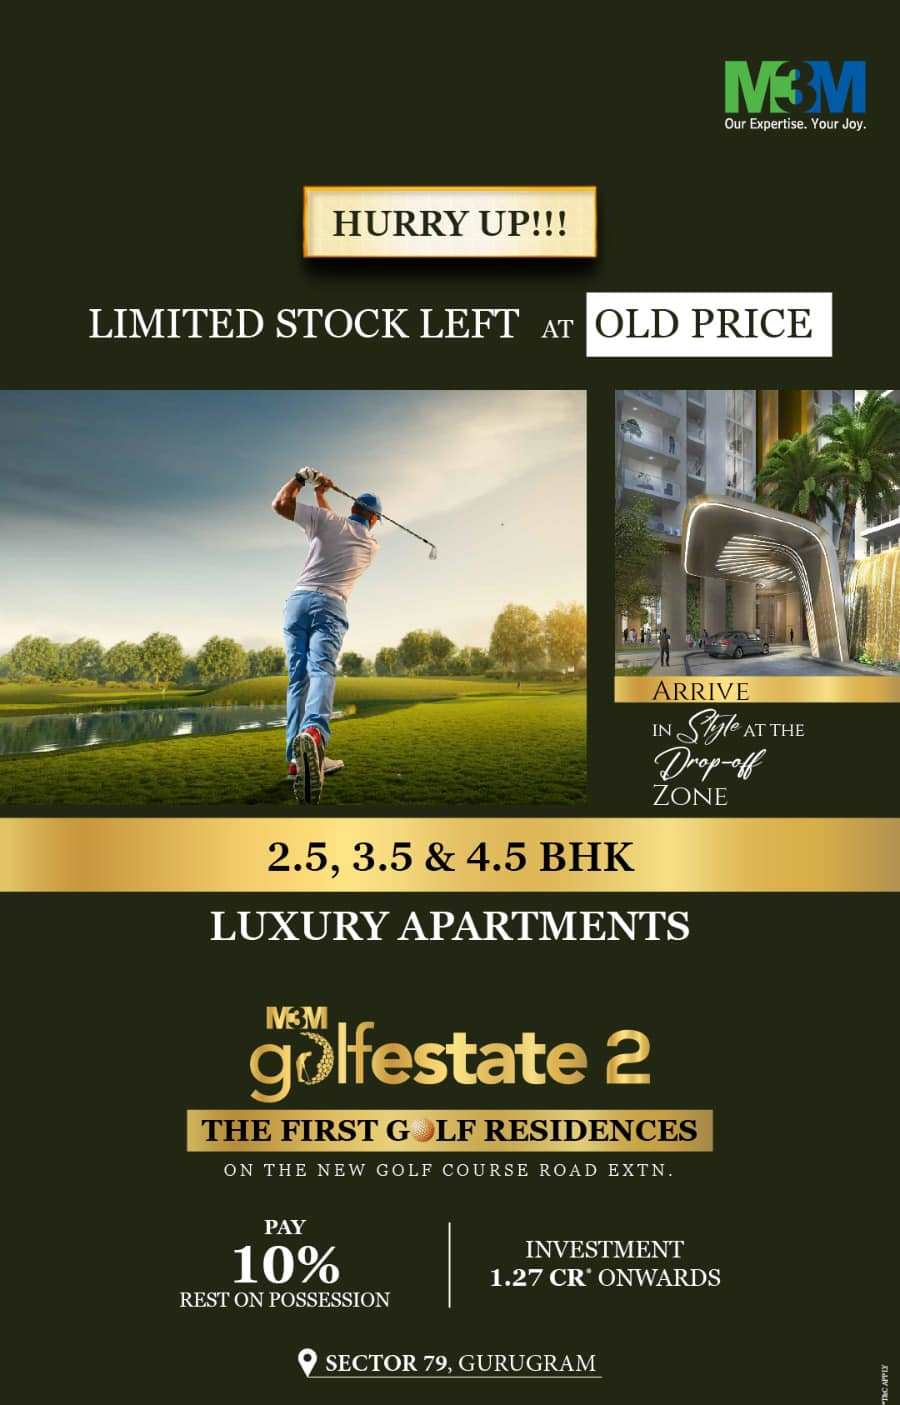 Limited stock left at old price at M3M Golf Estate Phase 2, Gurgaon Update